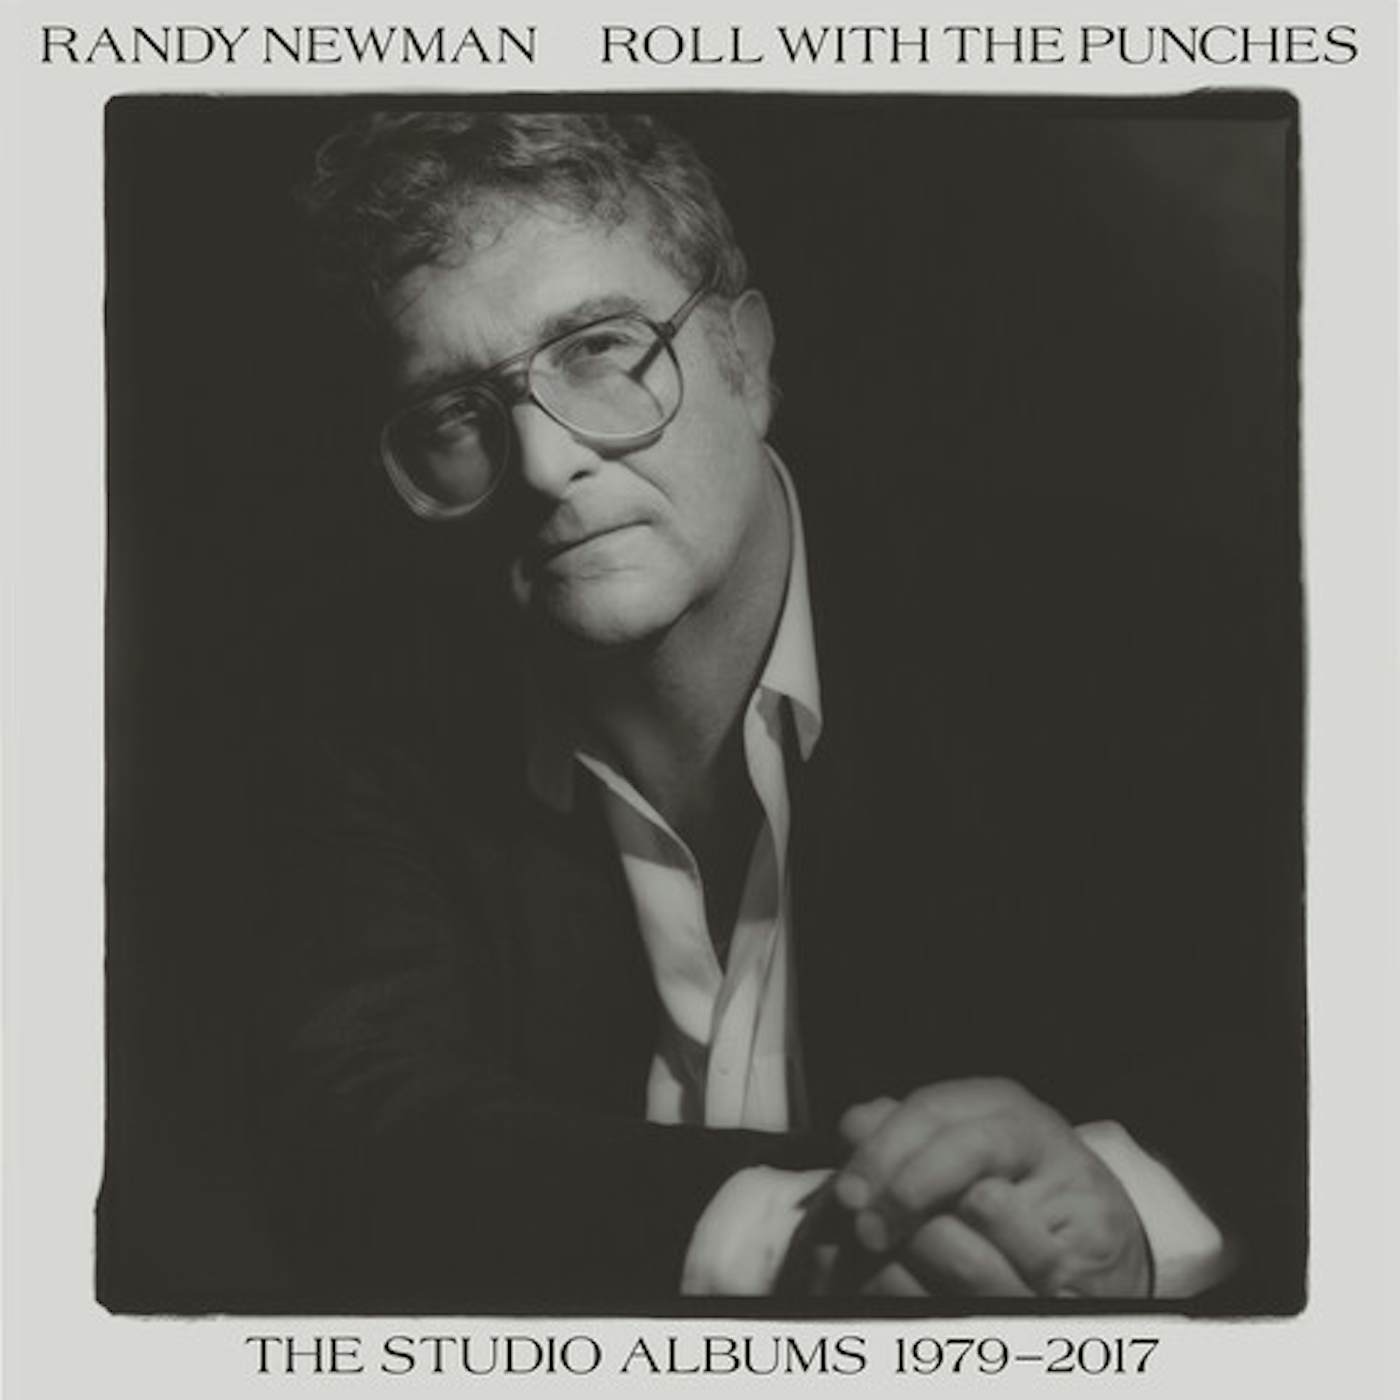 Randy Newman ROLL WITH THE PUNCHES THE STUDIO ALBUMS 1979-2017 Vinyl Record